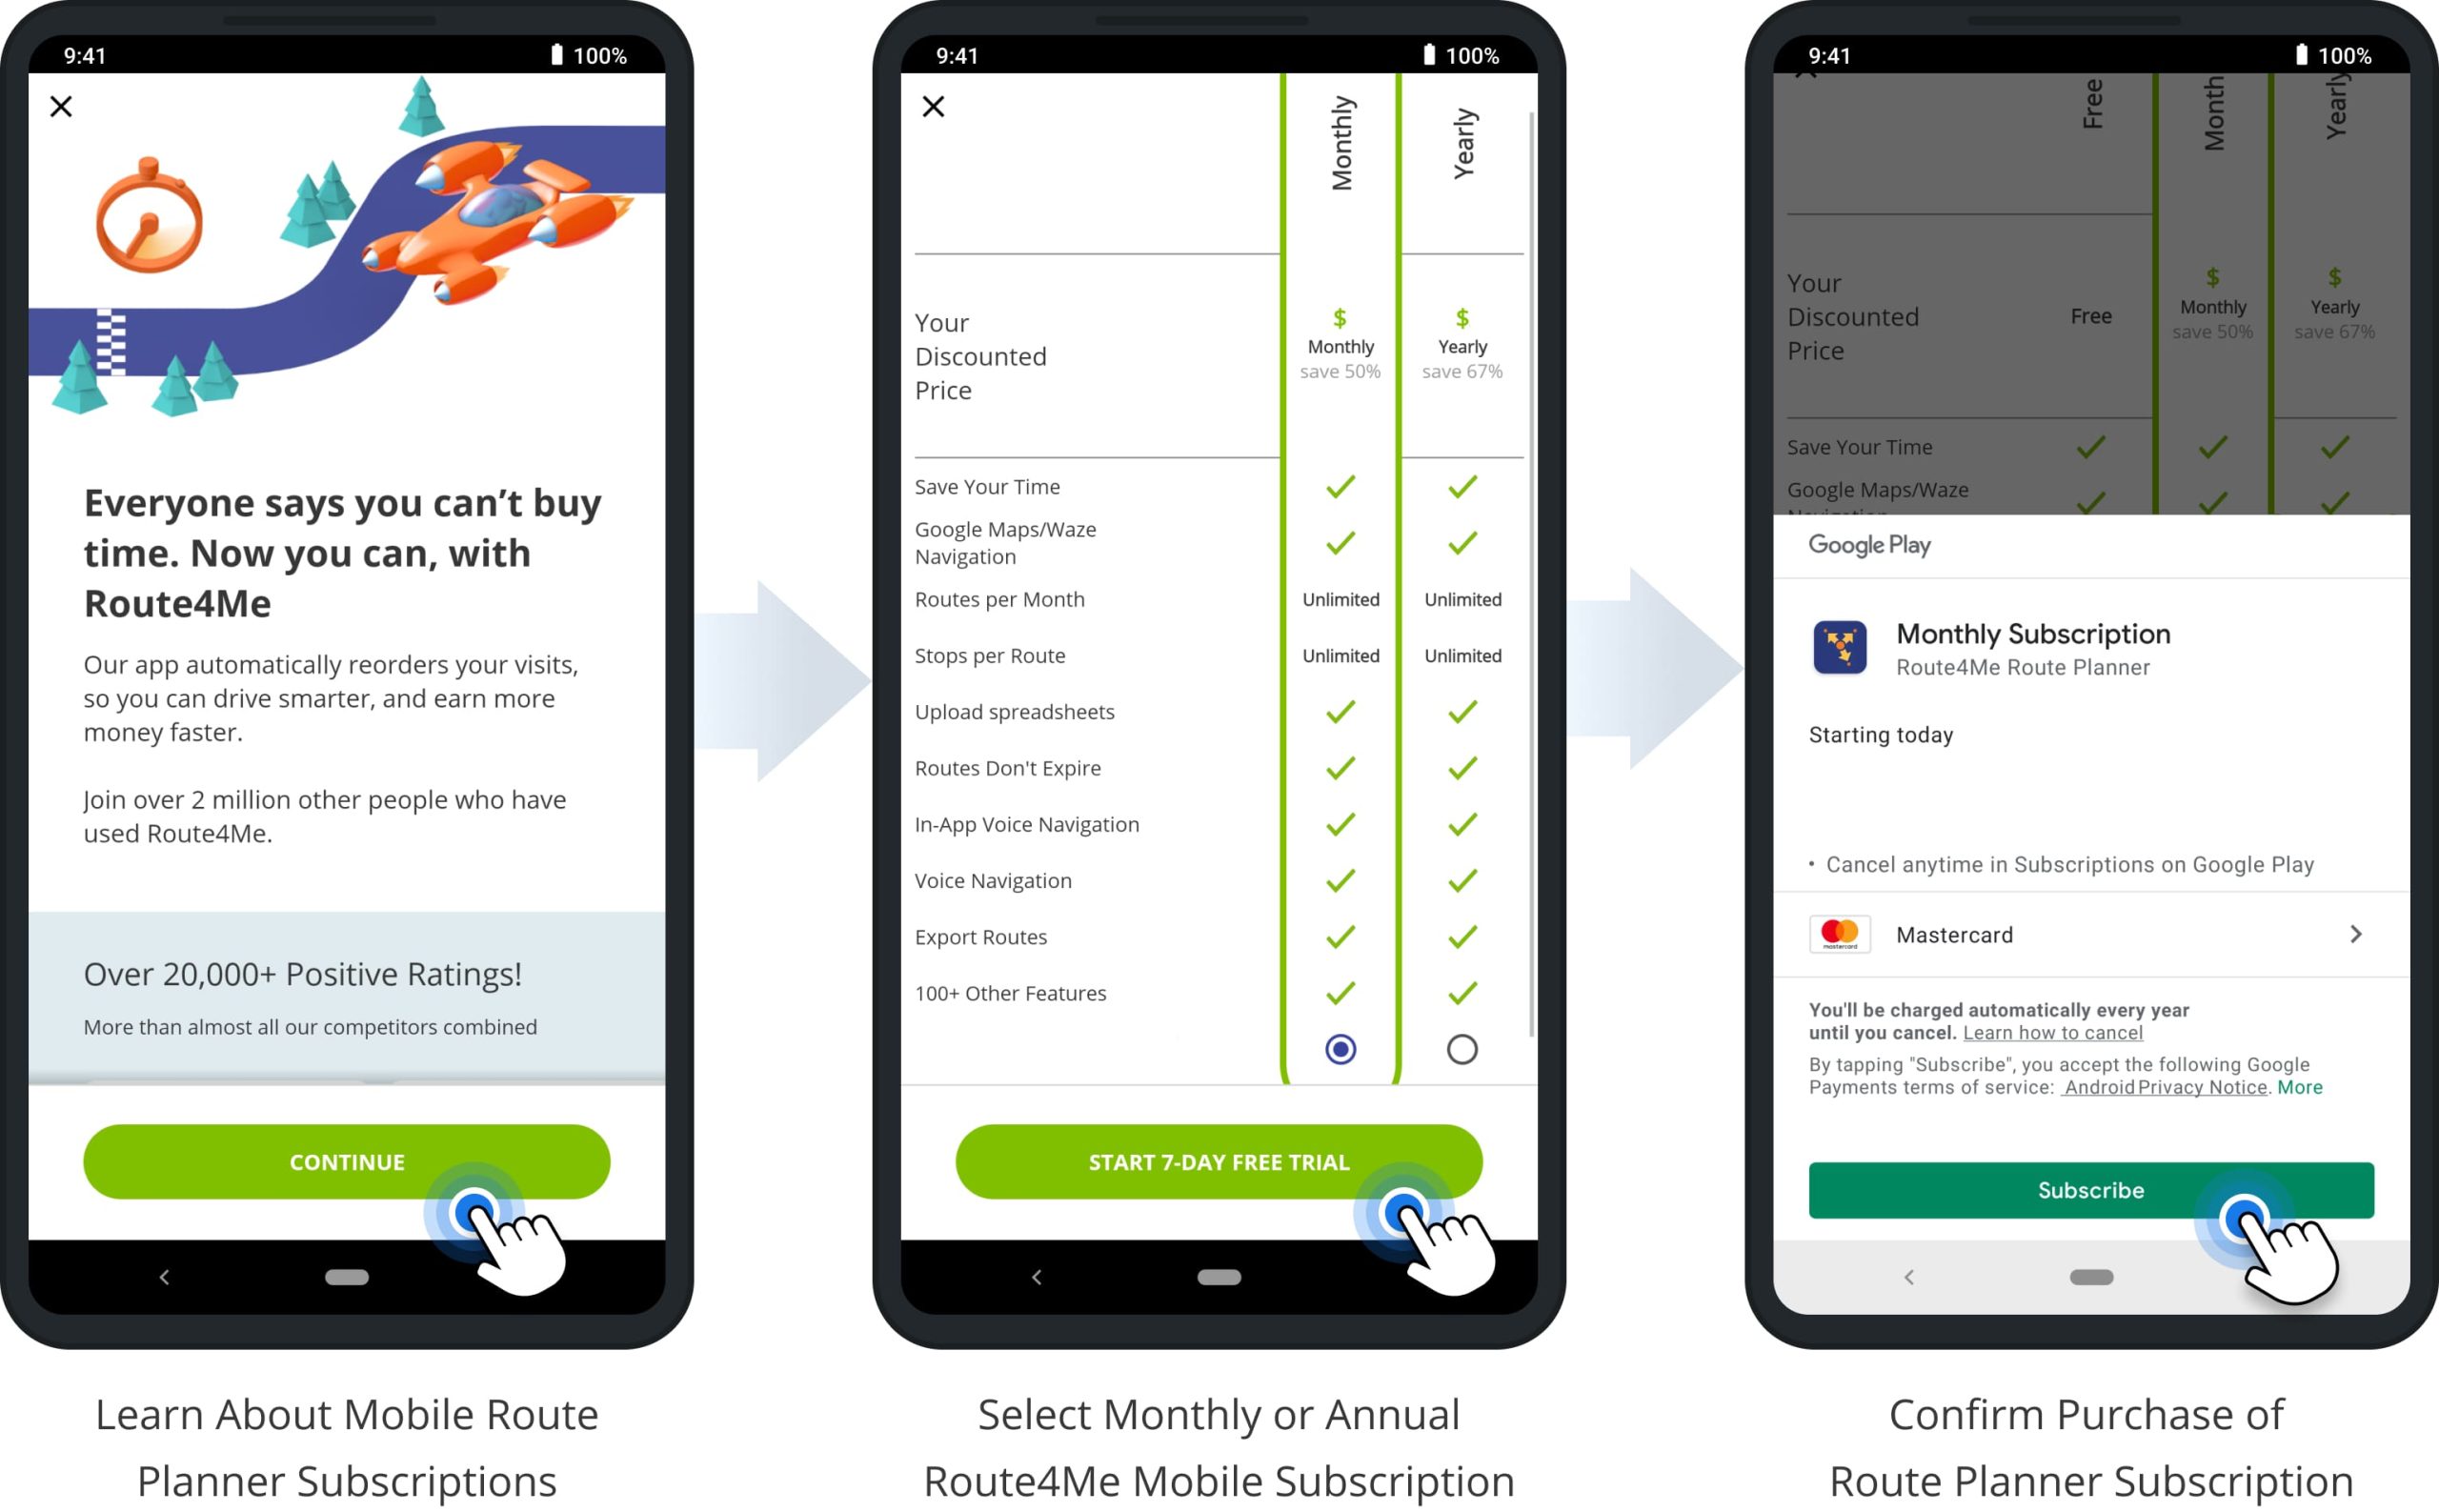 Select monthly or annual Mobile Route Planner subscription plan and start a free route planner trial.